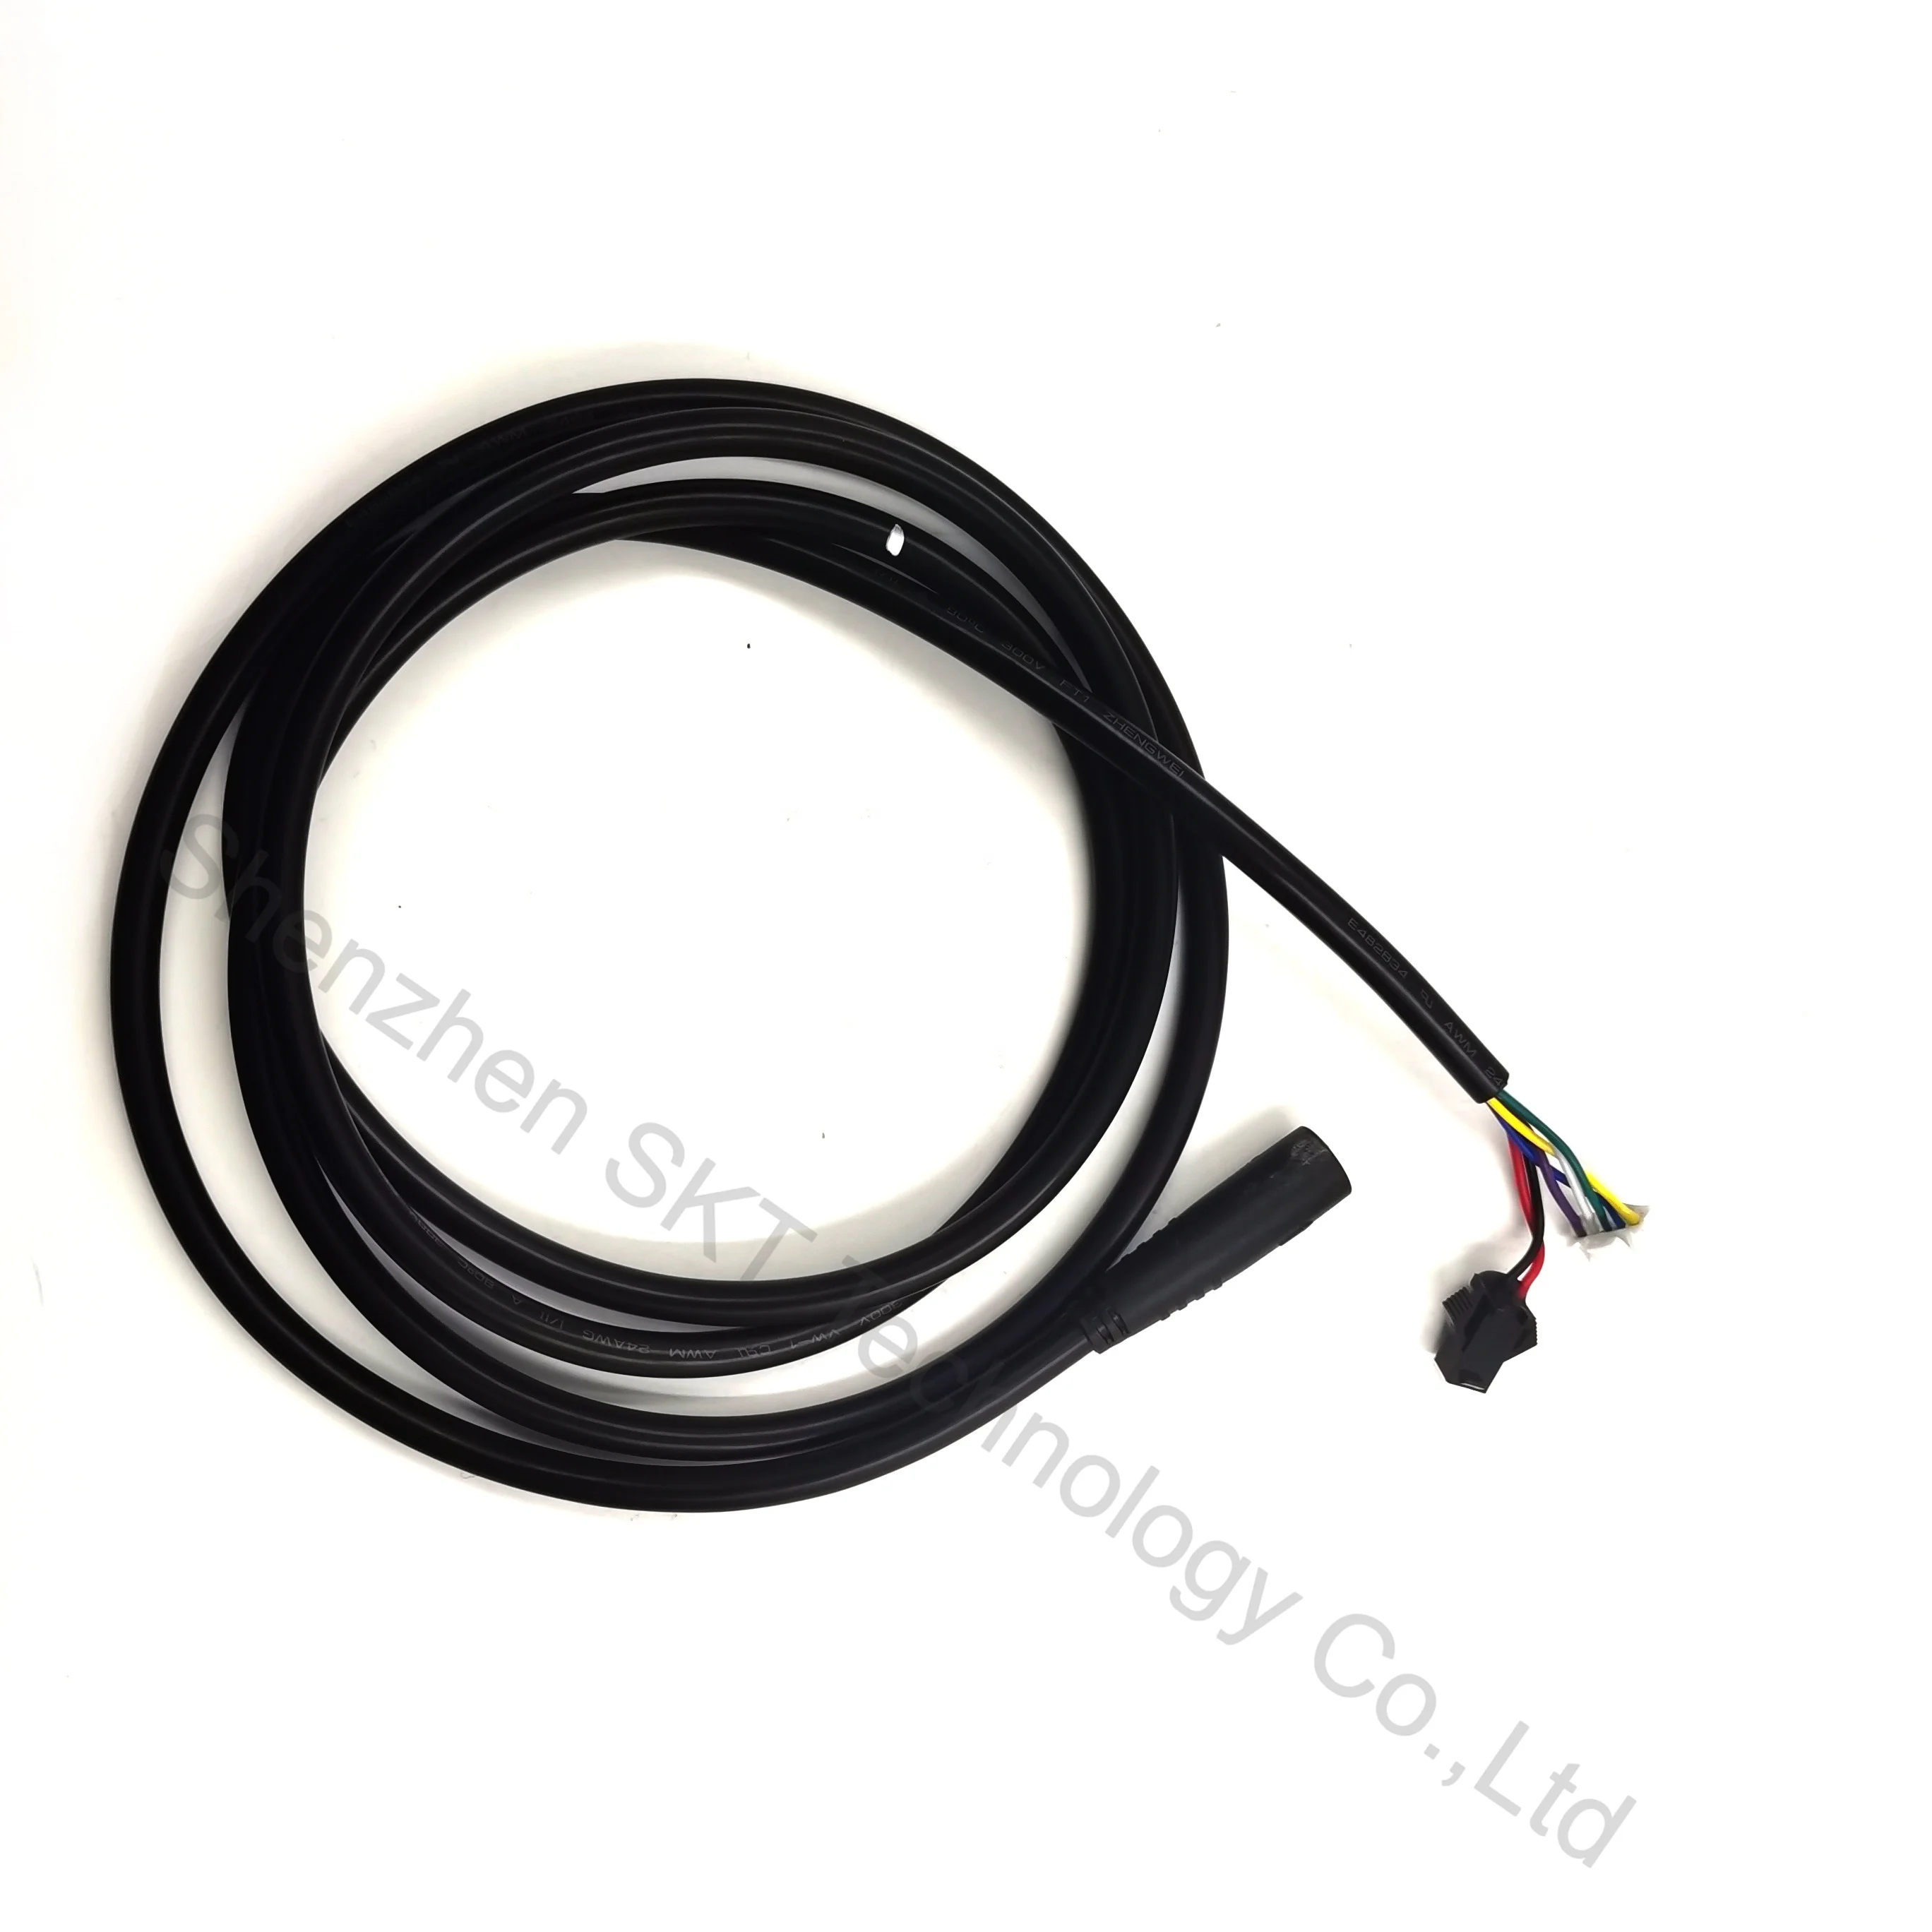 1 Power Cable For Segway Ninebot Max G30 Electric Scooter Original Segway